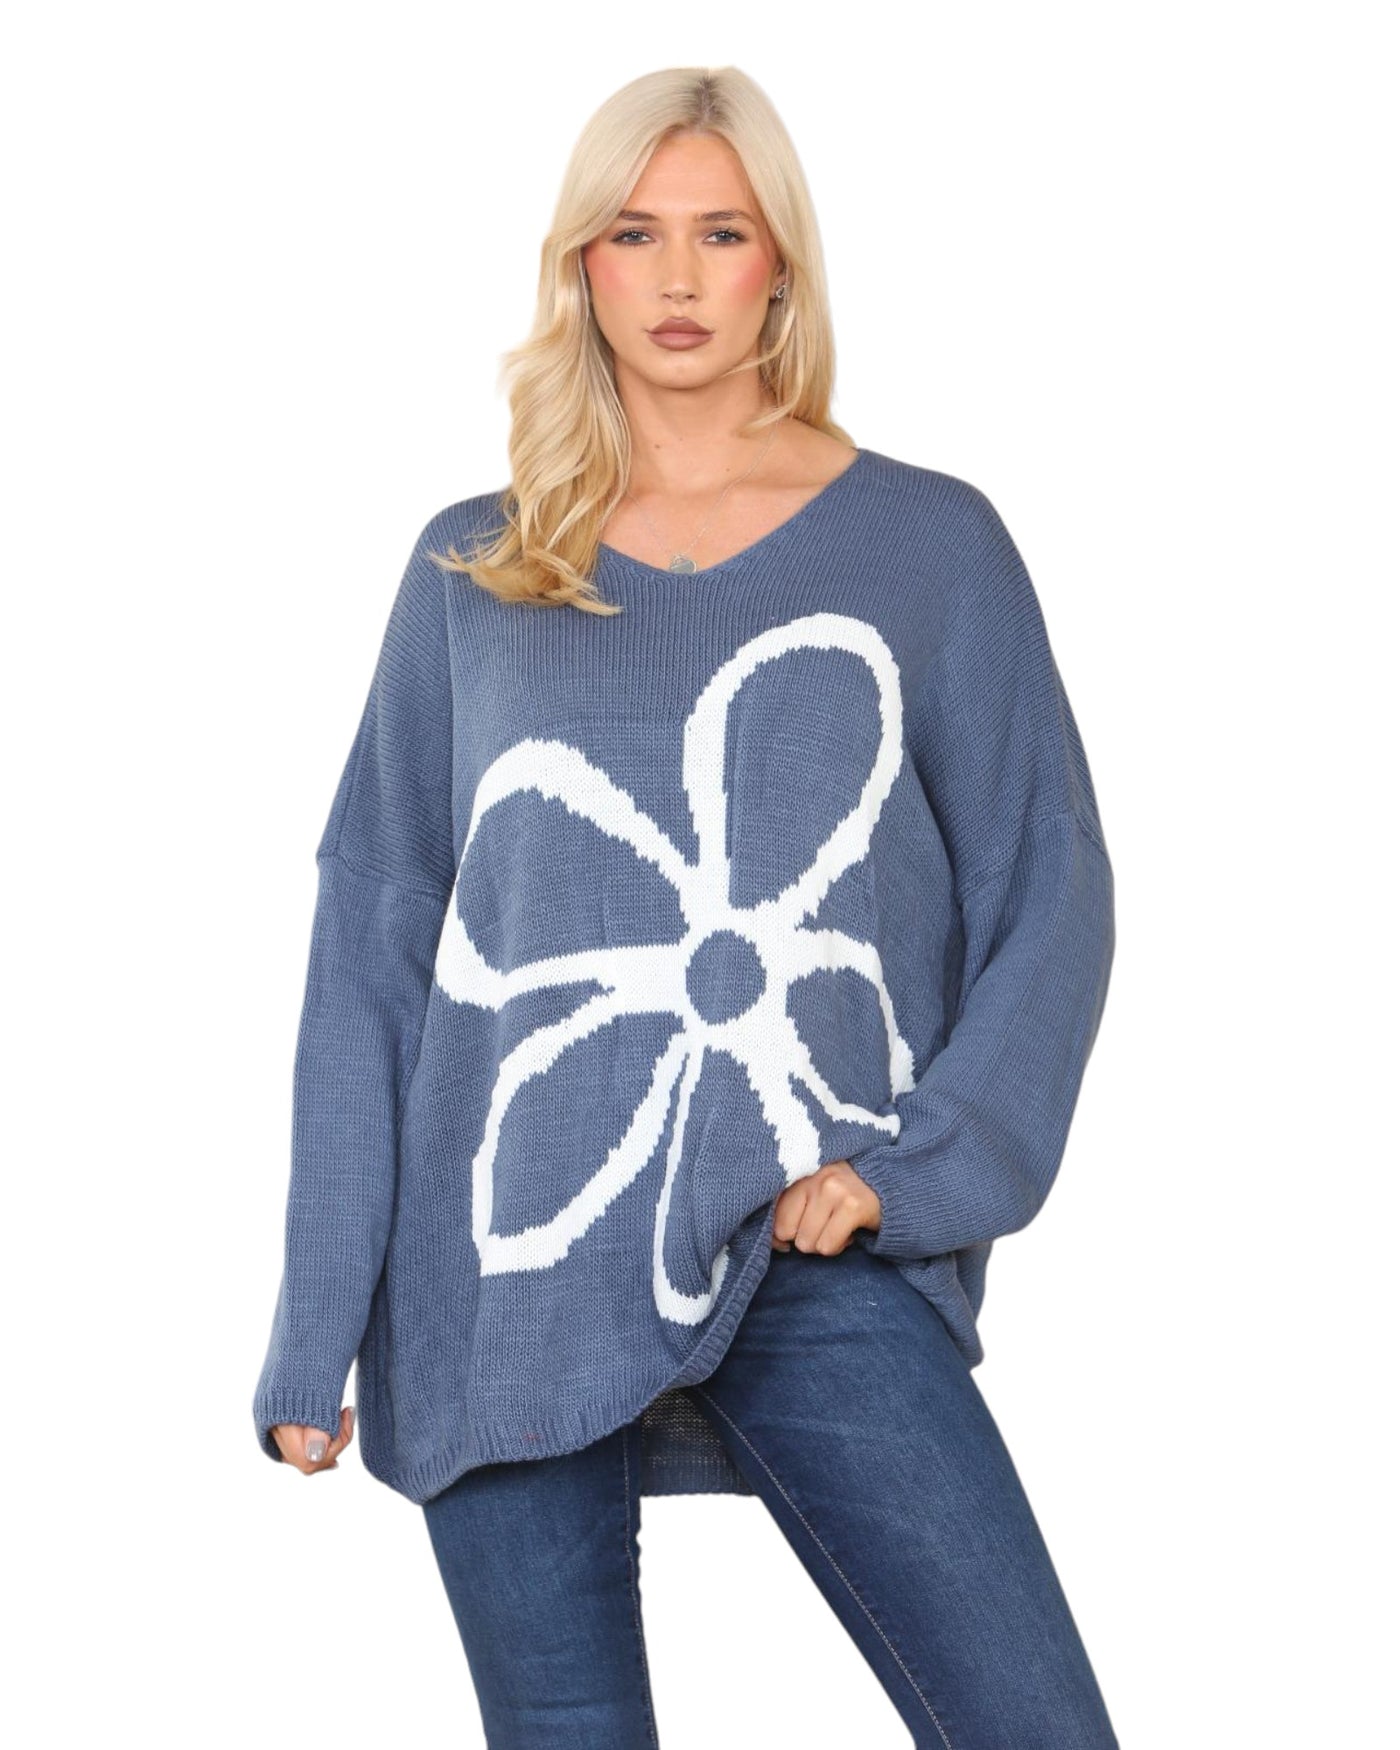 Oversized  Long Sleeve Floral Print  Knitted Jumper Top